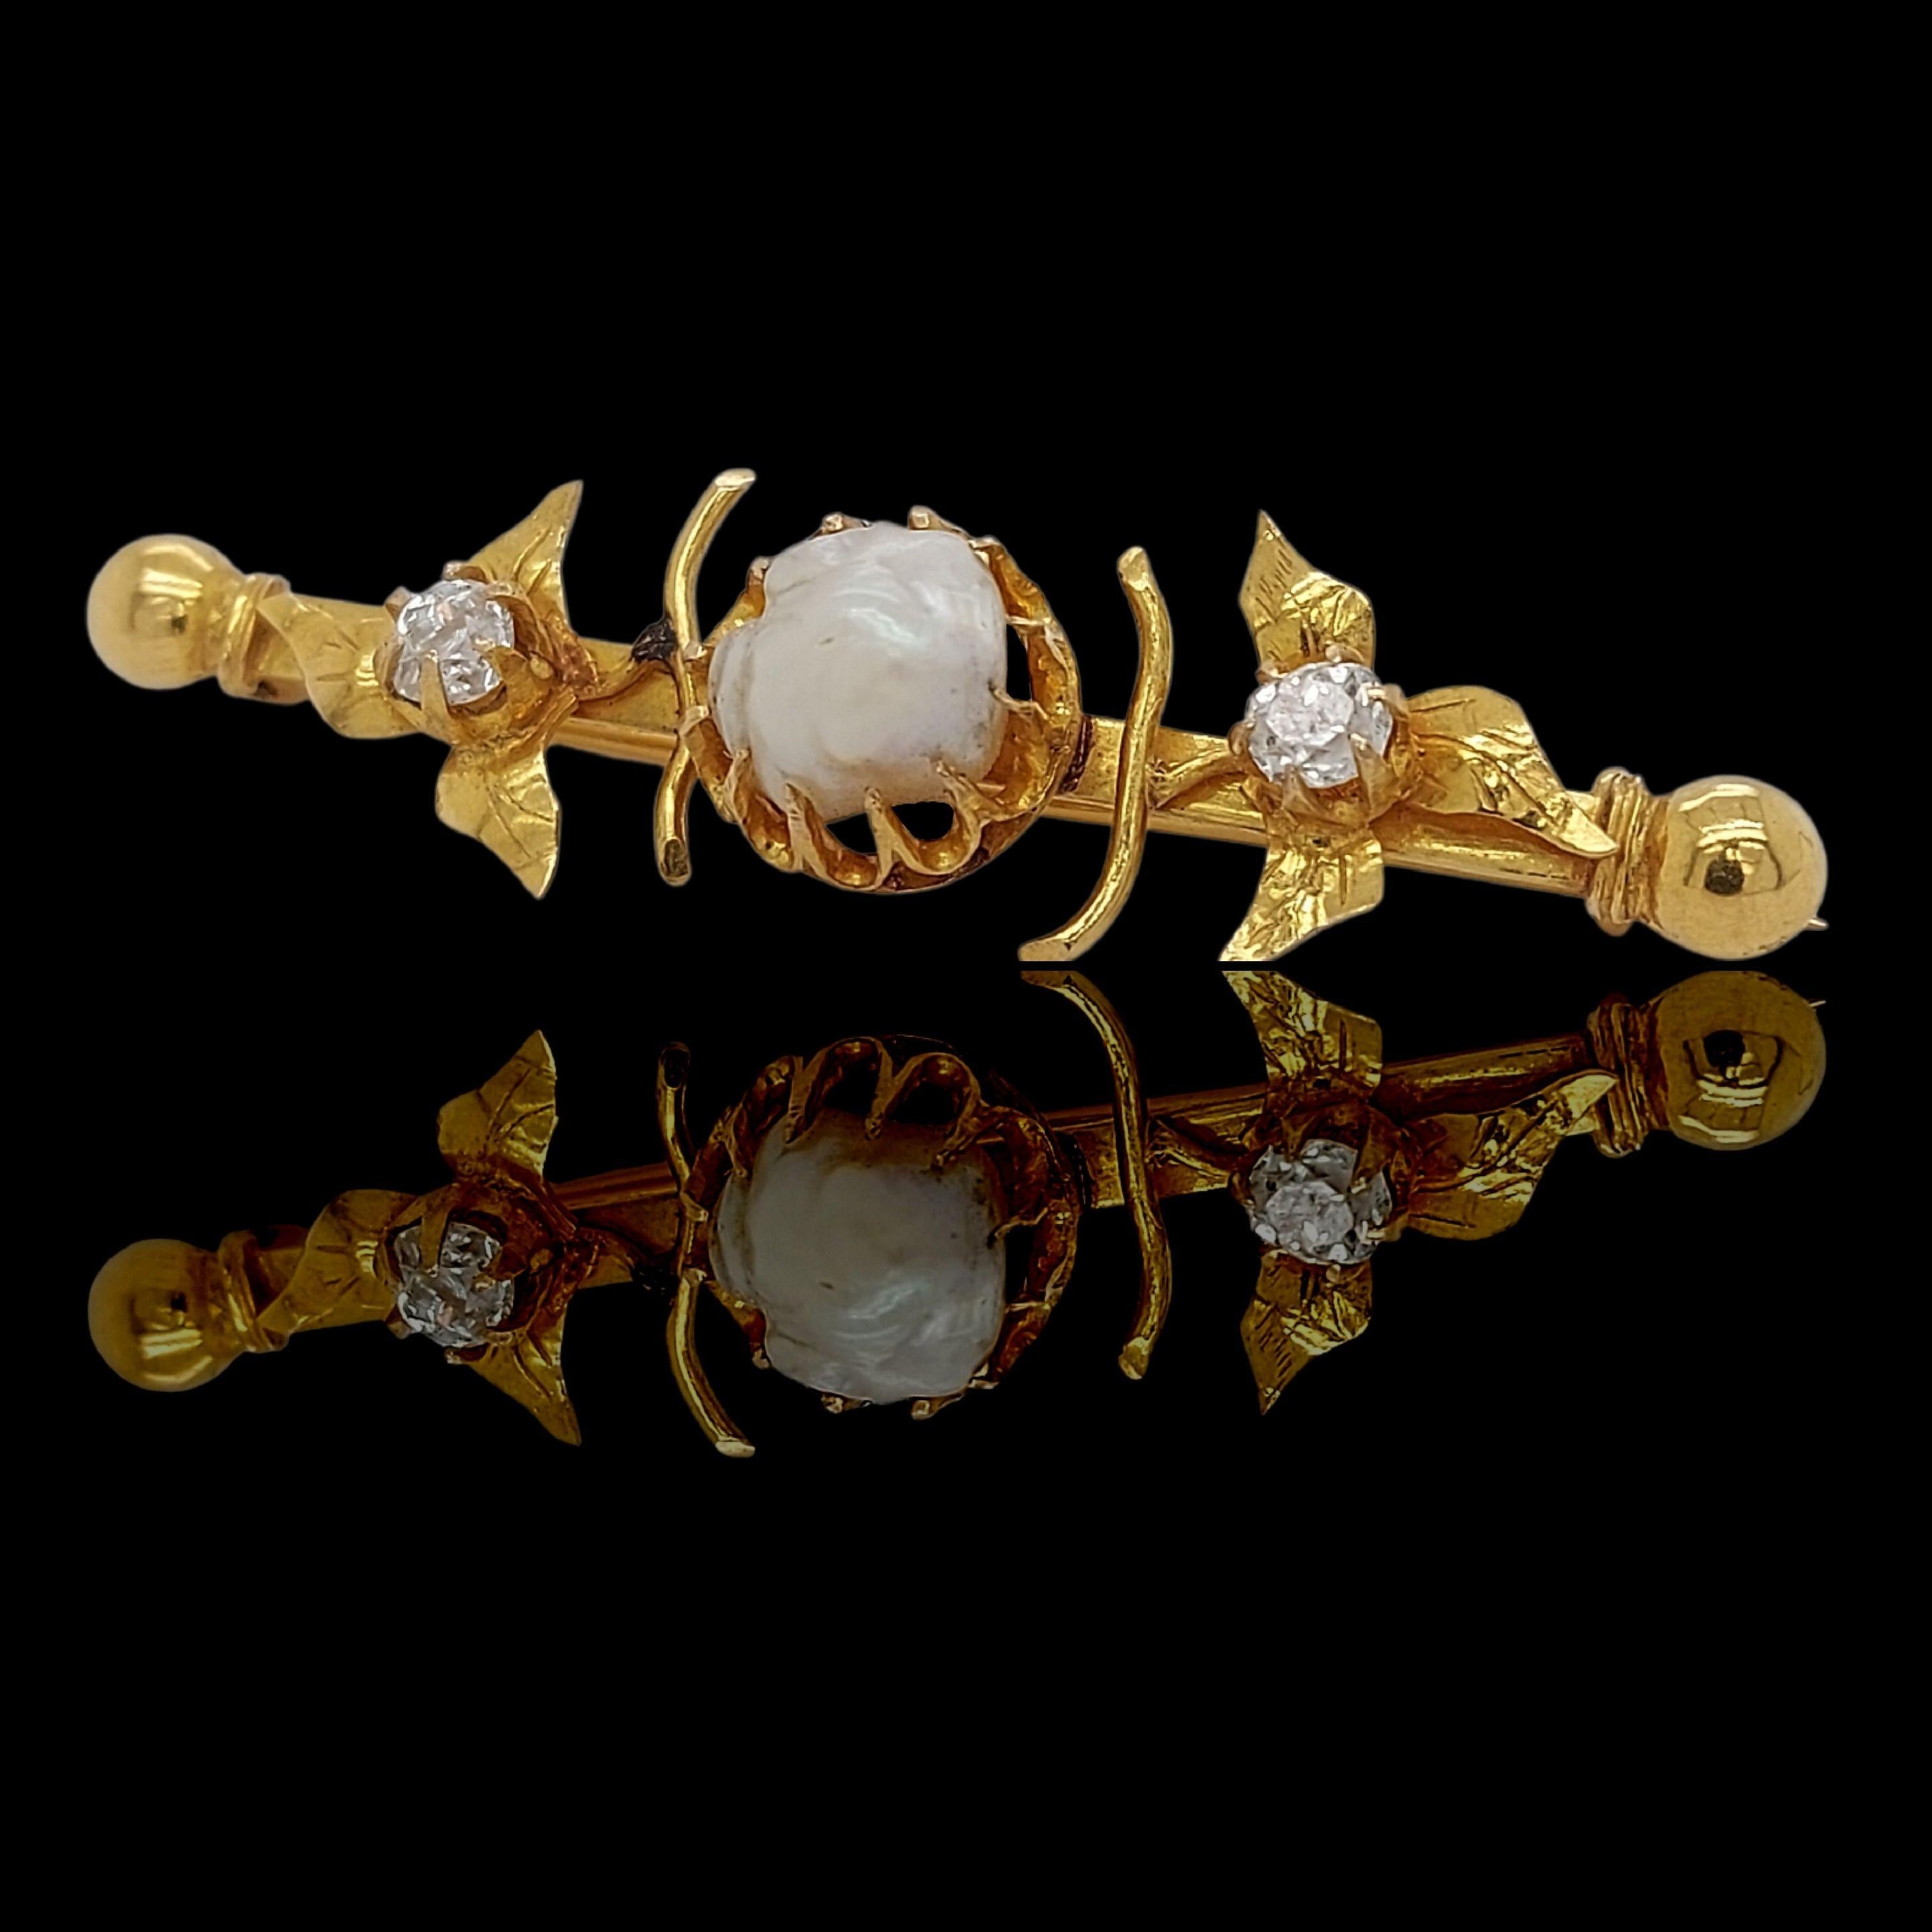 18kt Yellow Gold Brooch with a natural salt water pearl and diamonds

Pearl: Natural Salt water Baroque pearl, 4.37ct, No indications of treatment
The pearl comes with an ALGT certificate 

Diamonds: 2 Rose cut diamonds together approx. 0.46ct